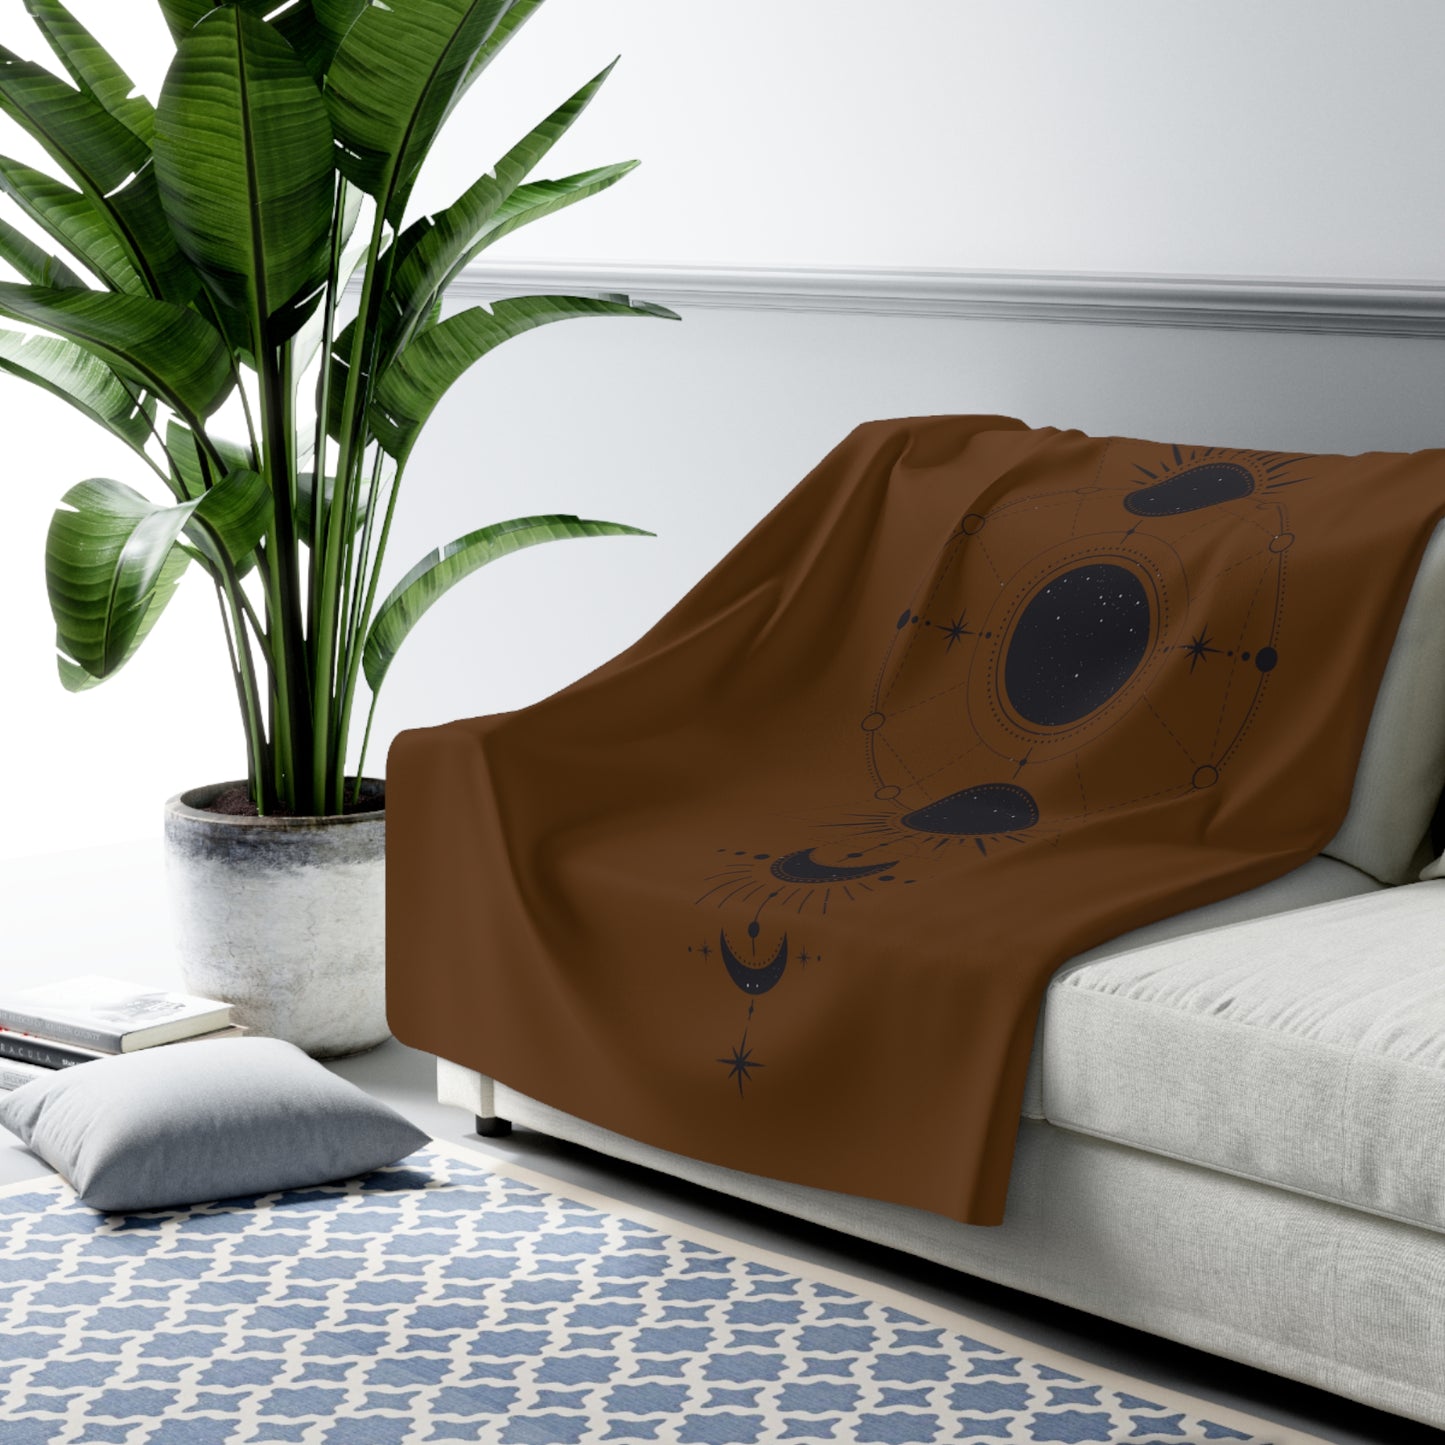 LUXURIOUS COZY BLANKET: THE EPITOME OF COMFORT AND WARMTH | Moon Brown 